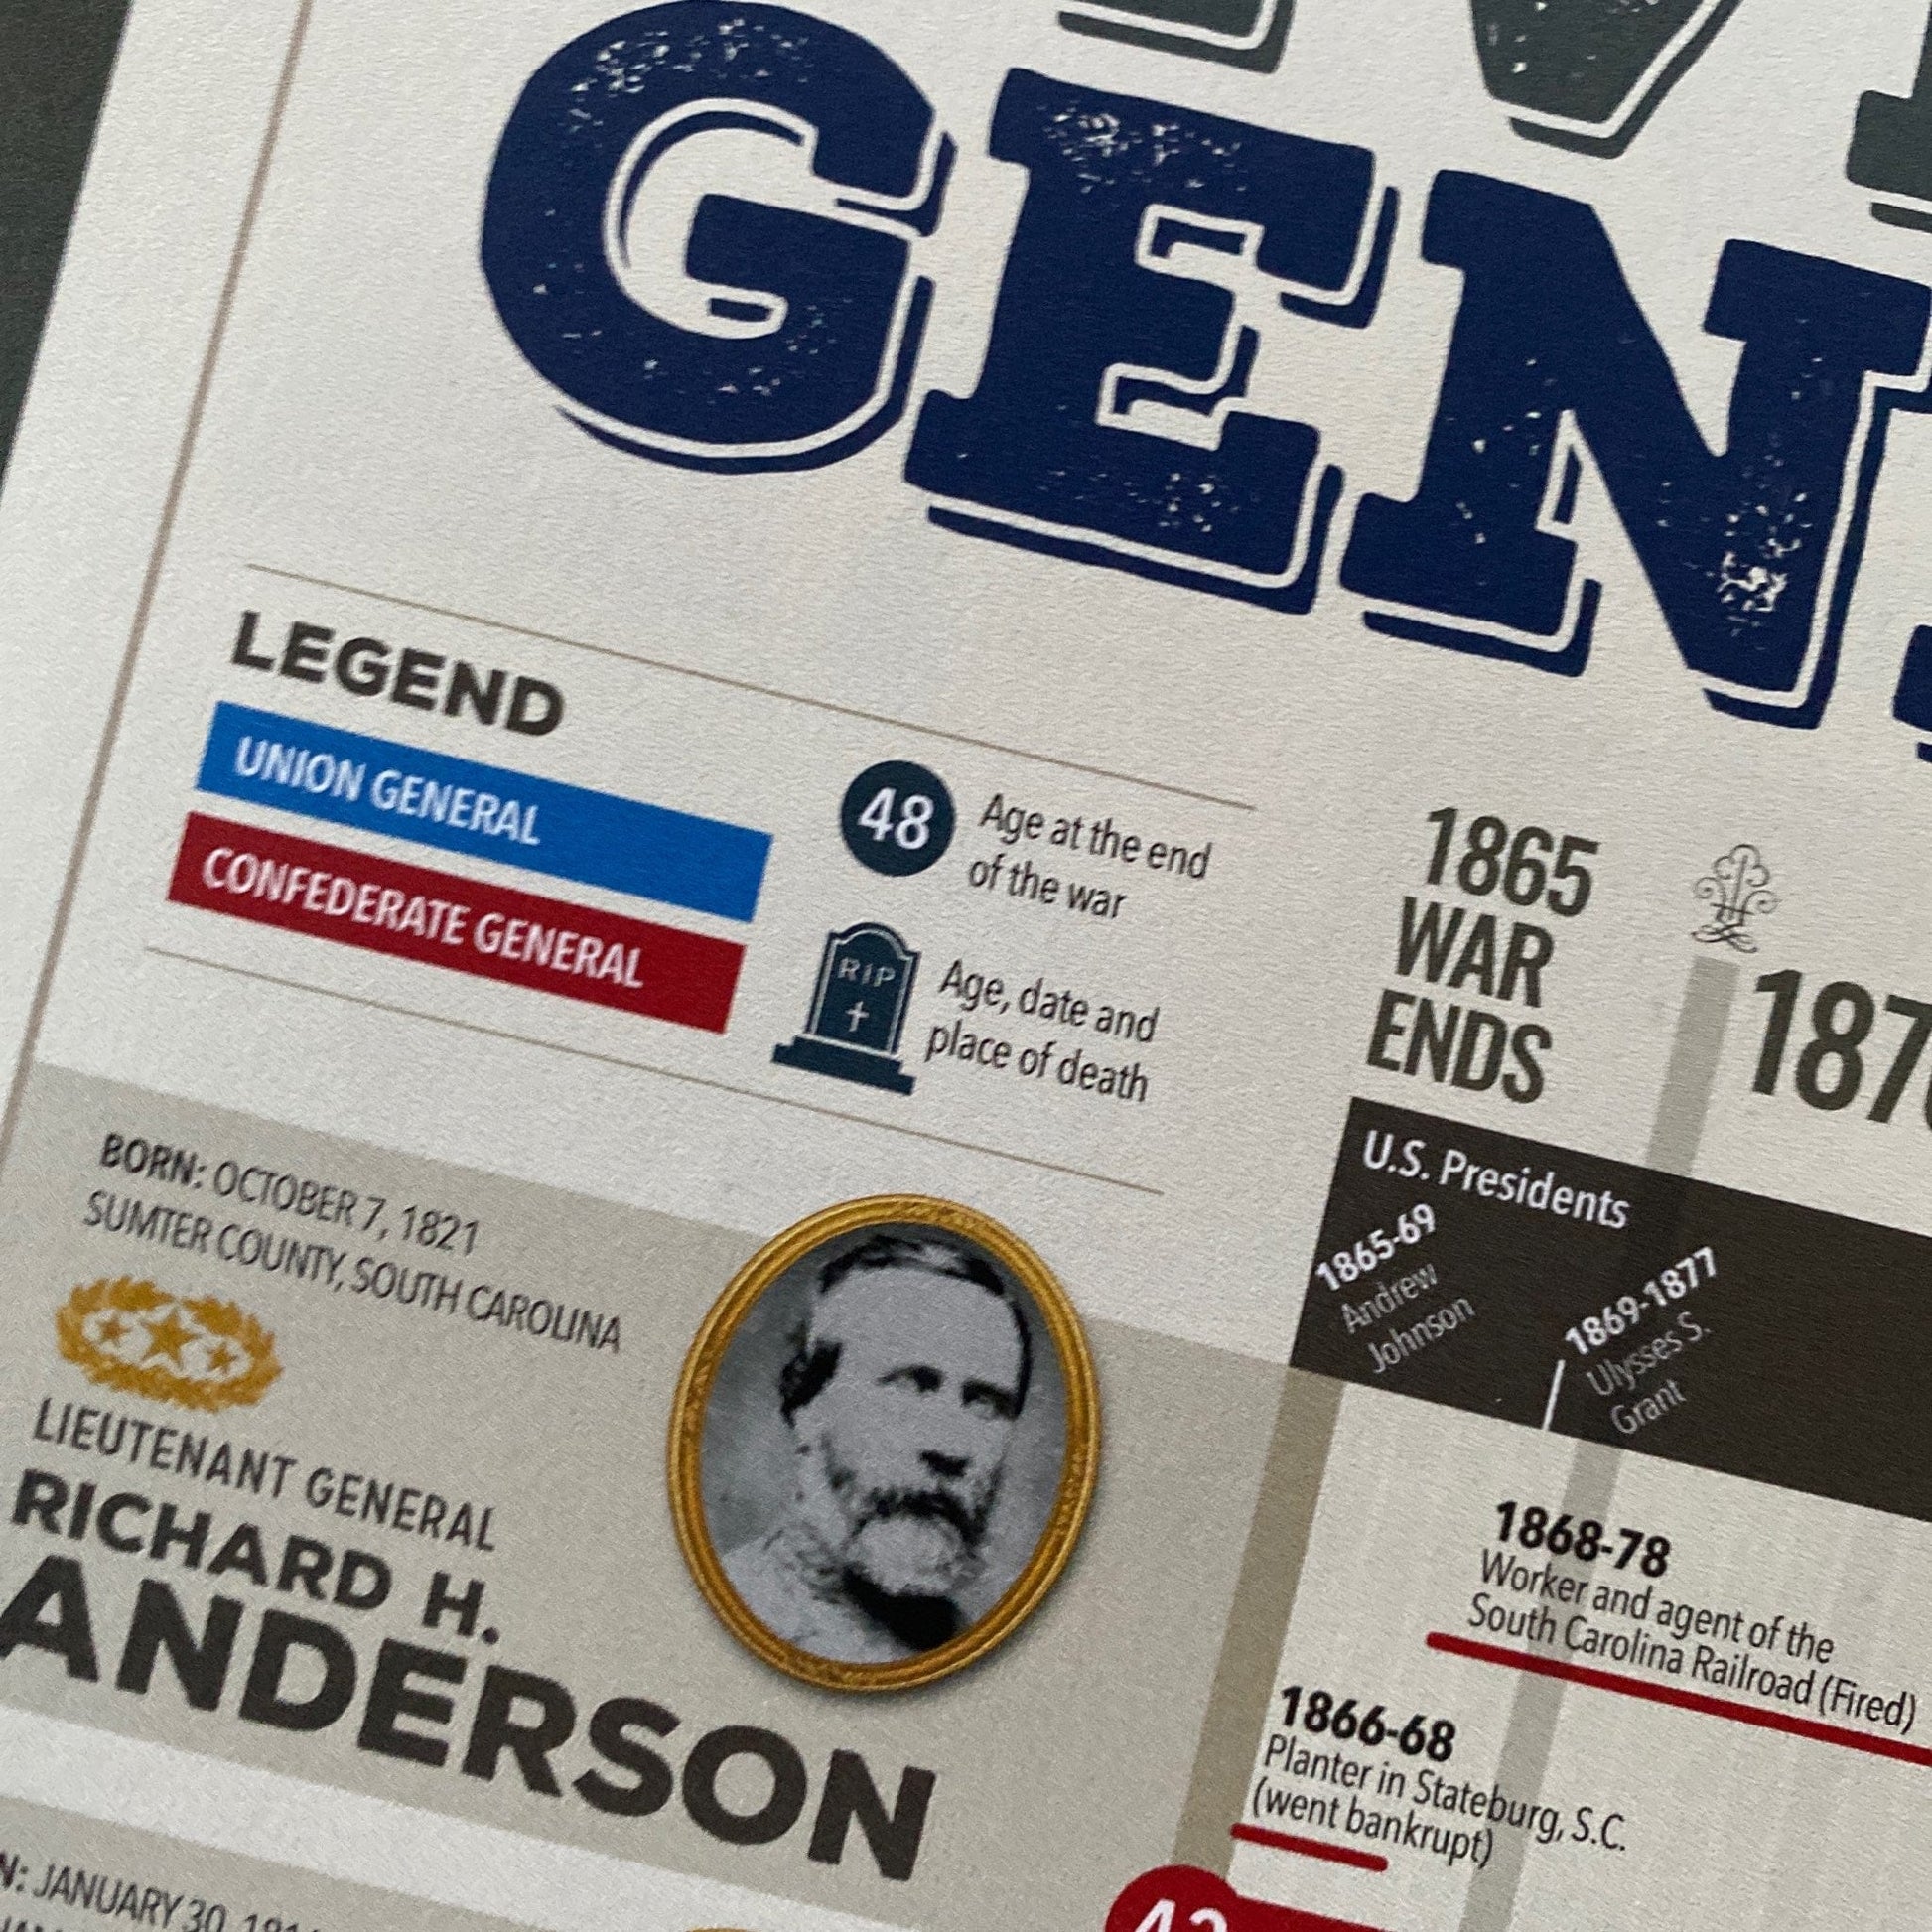 Legends - "The Postbellum Careers of Civil War Generals" 88" High Poster Exclusive from the History List Store